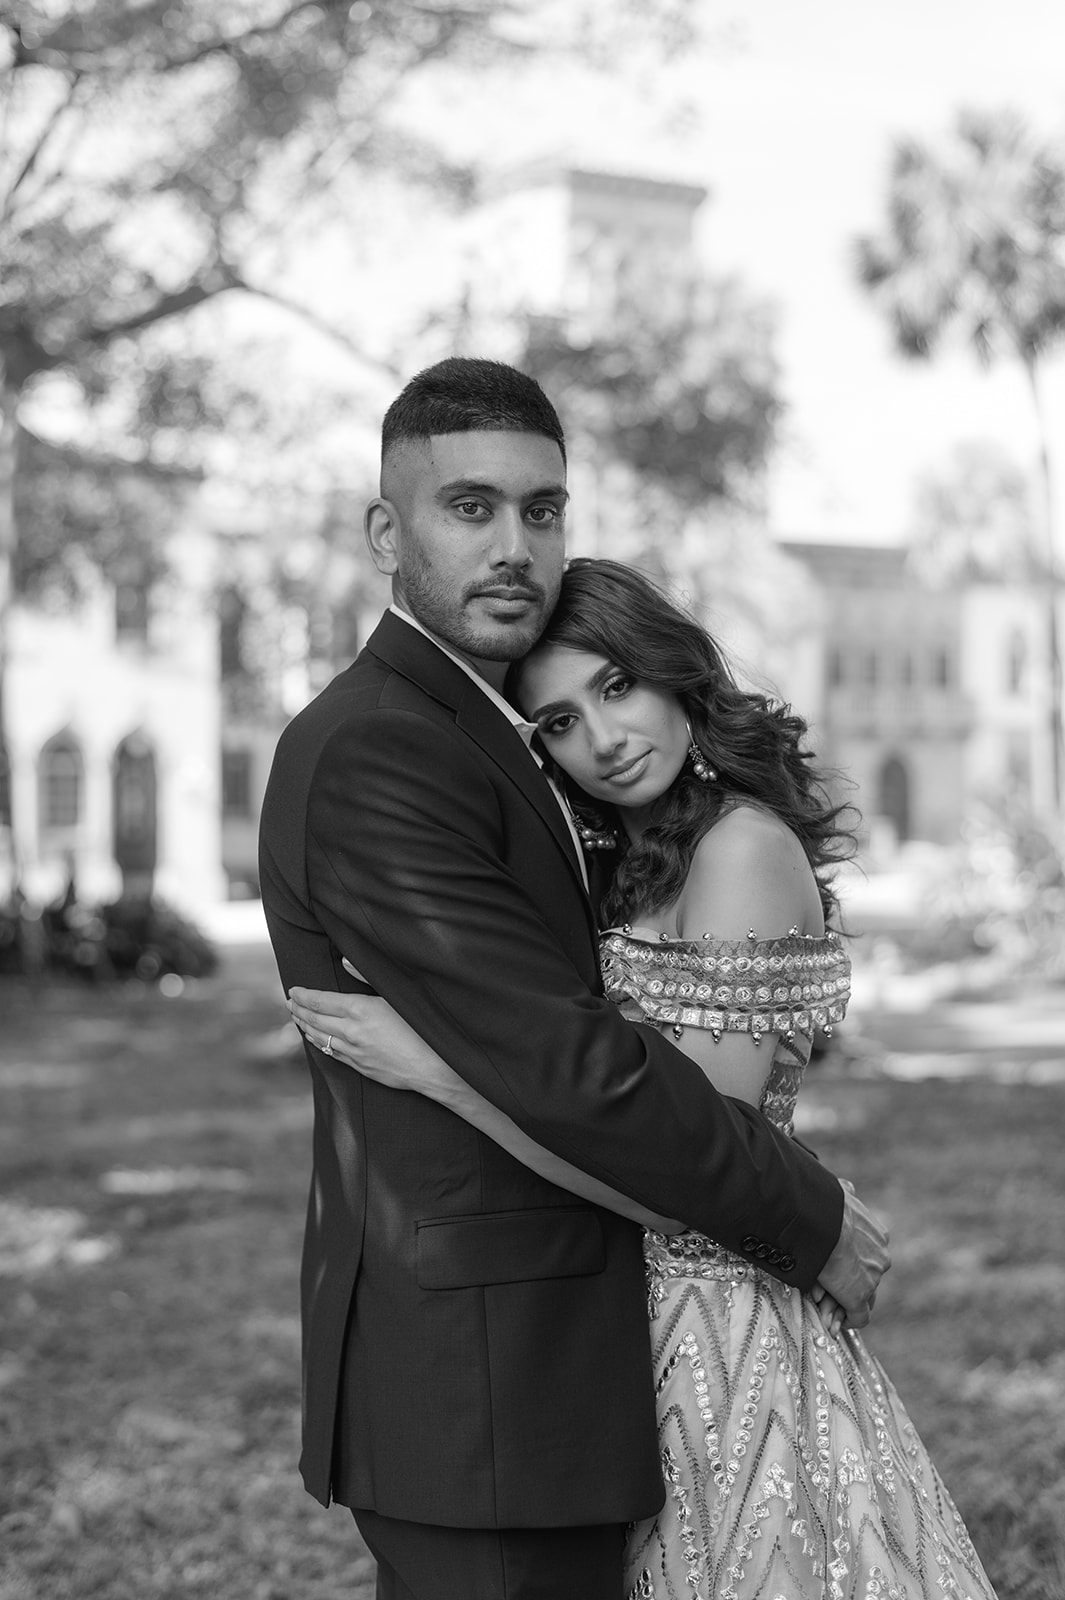 "Ringling Museum engagement shoot captures the elegance and beauty of the Ca' d'Zan mansion"
